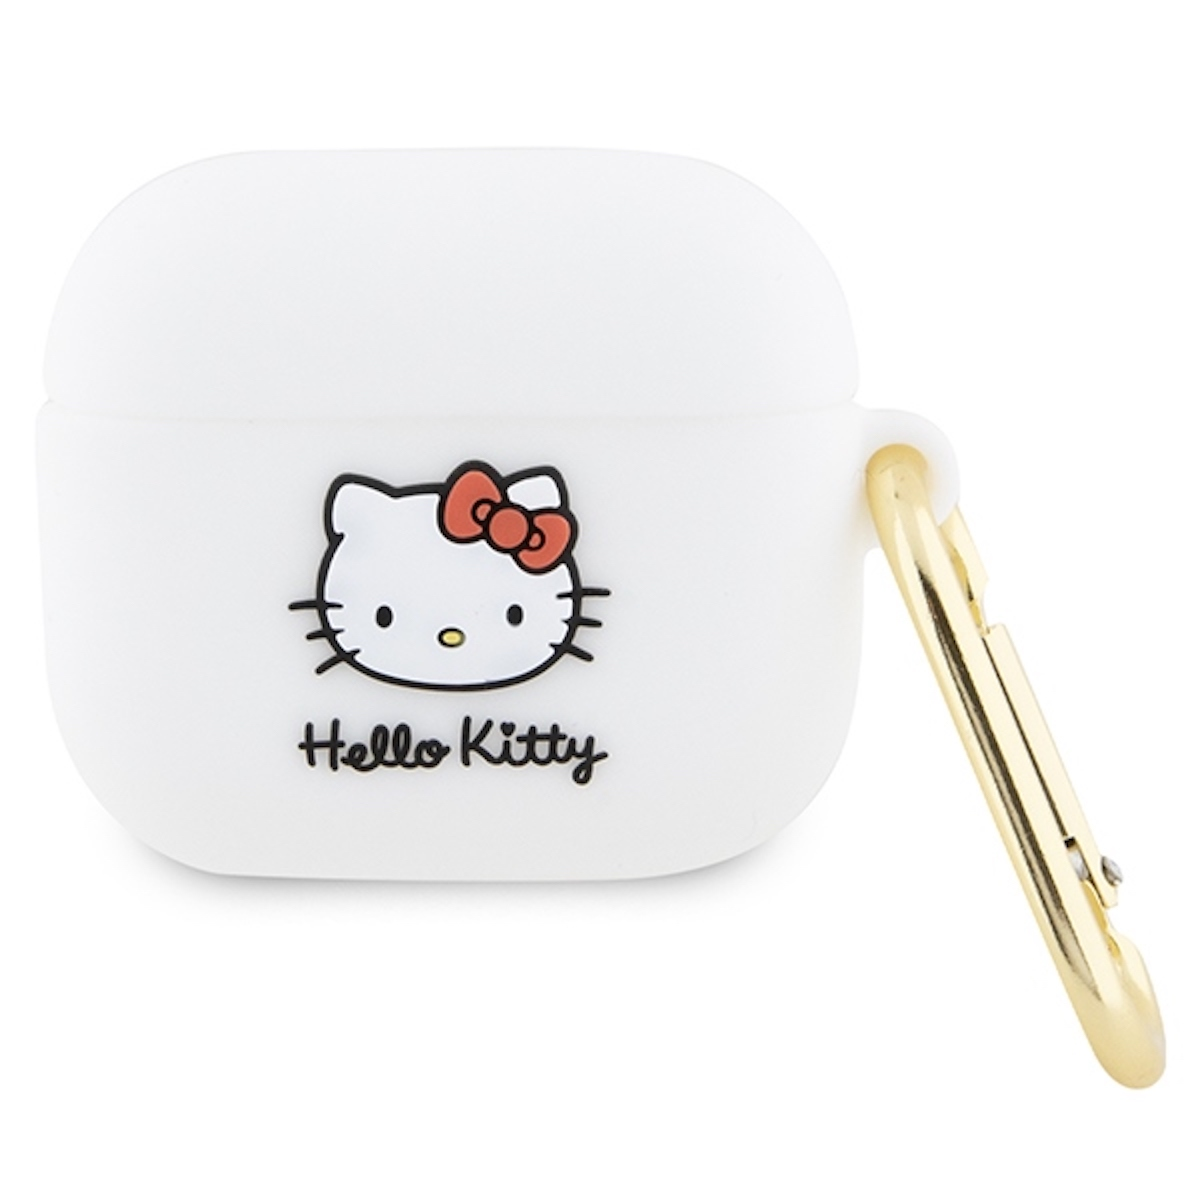 HELLO KITTY BY Full Hülle CHEFMADE 3, Tasche Schutzhülle, Apple, Head Kitty Silikon Cover, Weiß 3D AirPods AirPods